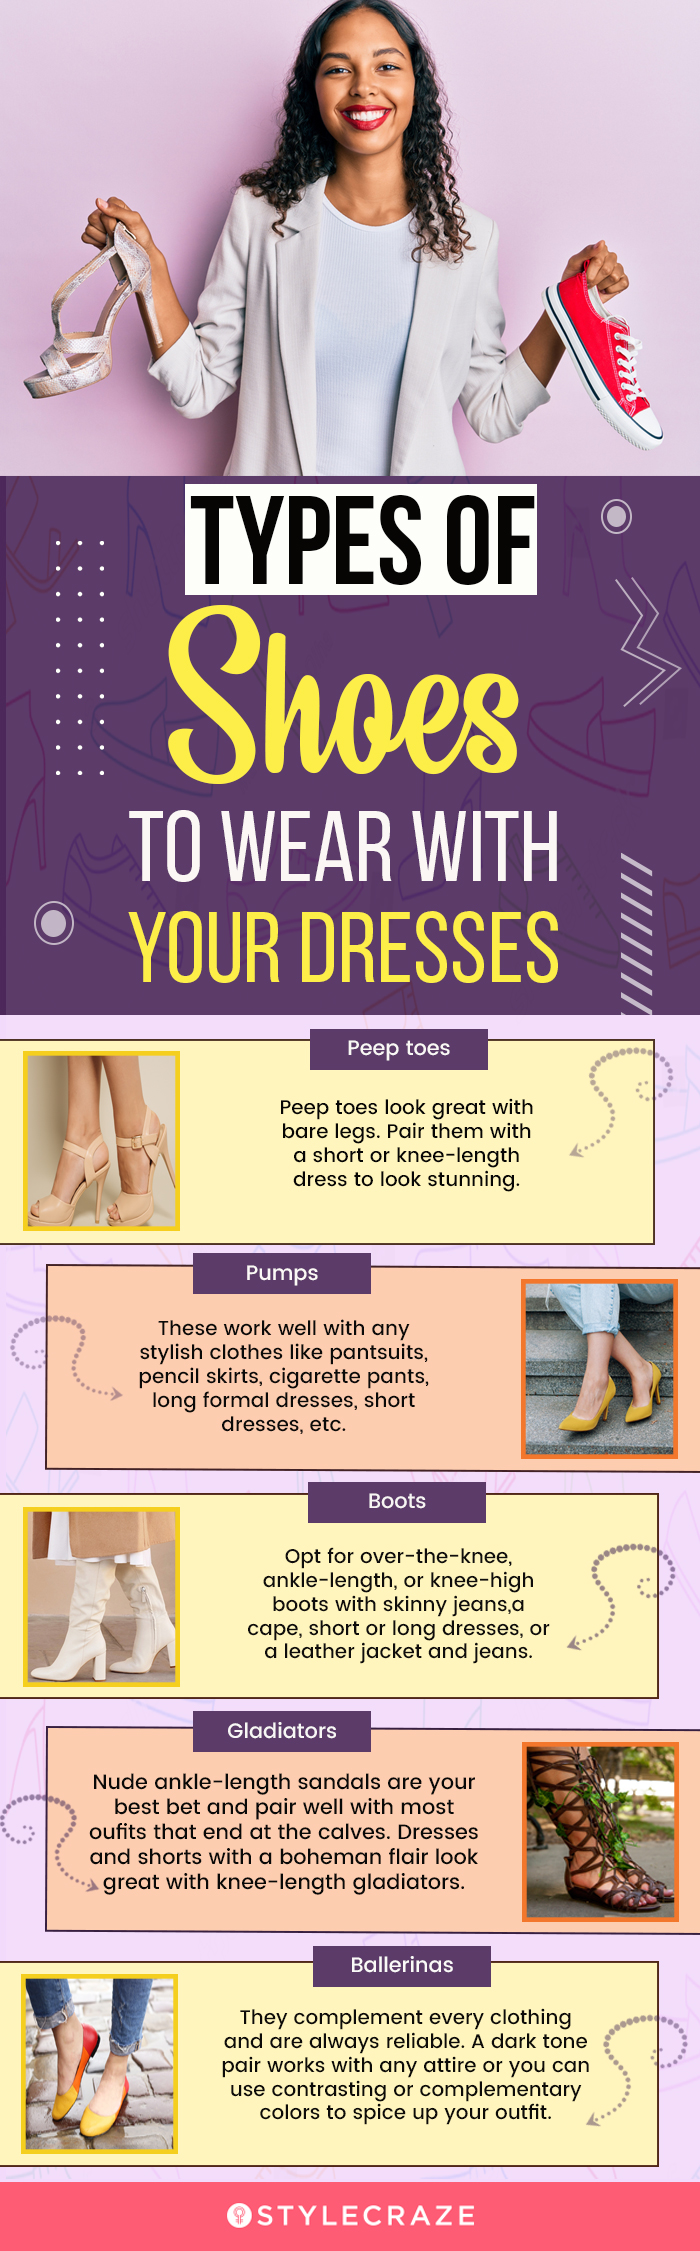 types of shoes to wear with your dresses (infographic)